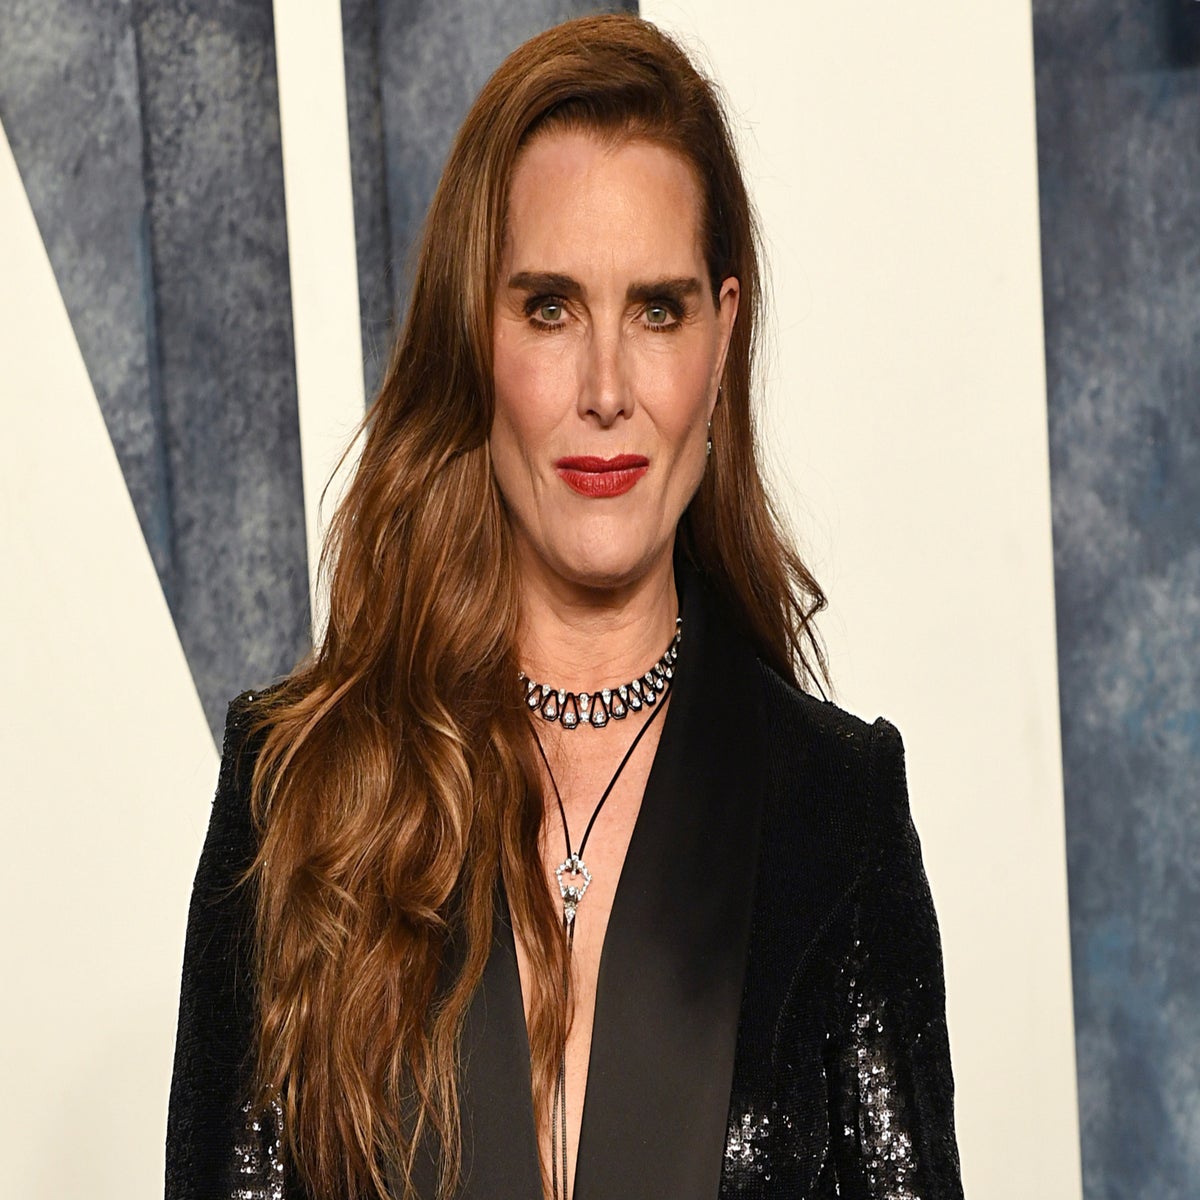 Top Nudist Mom - Brooke Shields doesn't know why her mother 'thought it was all right' for  her to pose nude at age 10 | The Independent